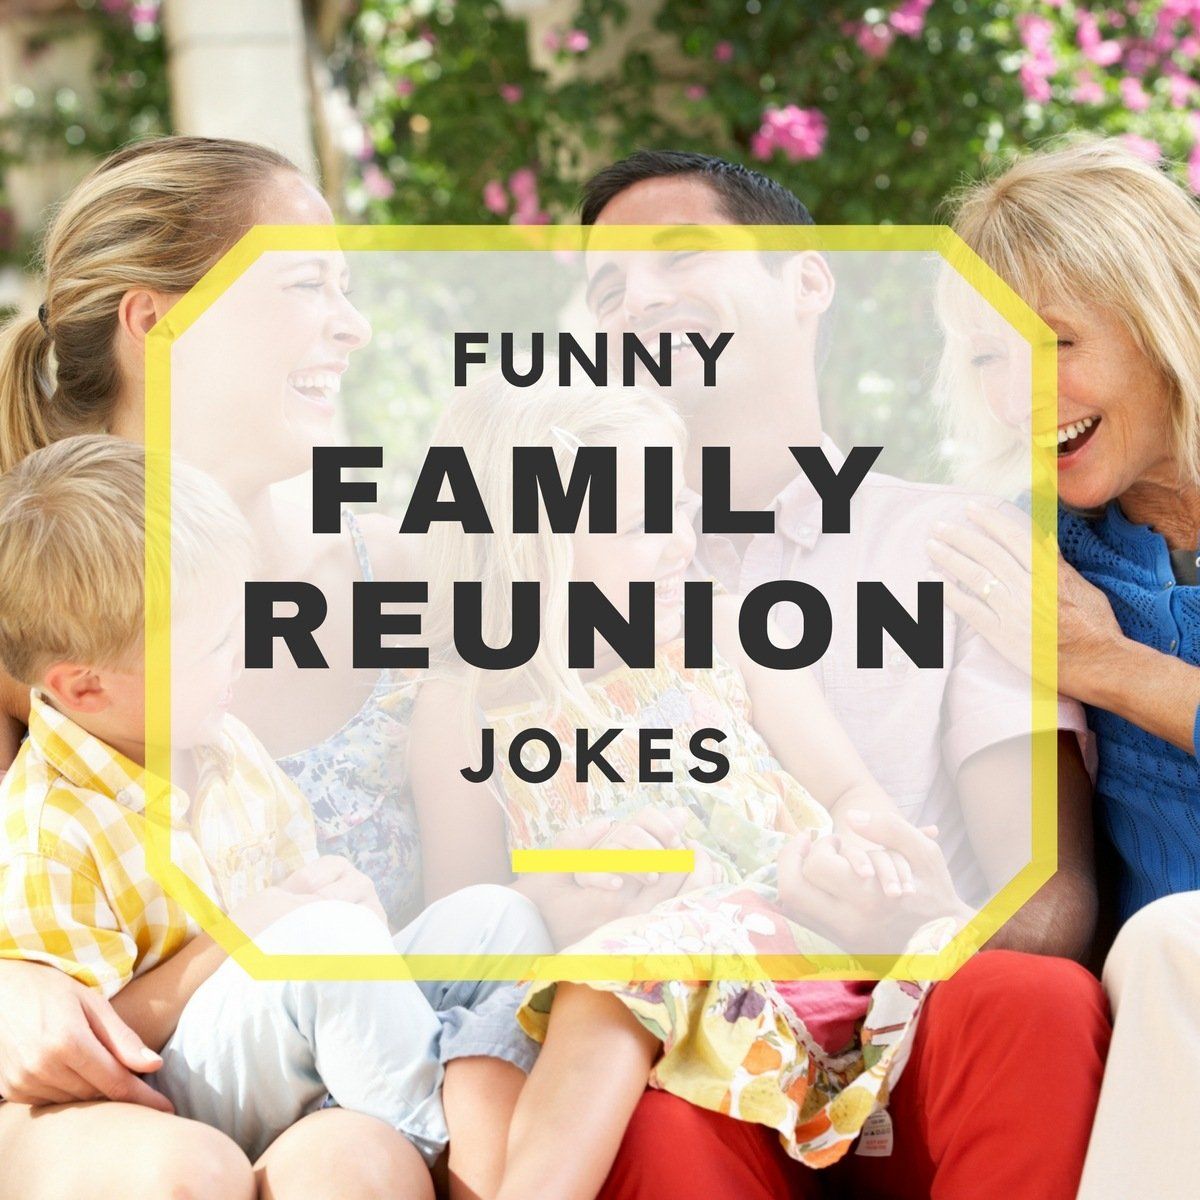 Beetle recommend best of family reunions about Jokes